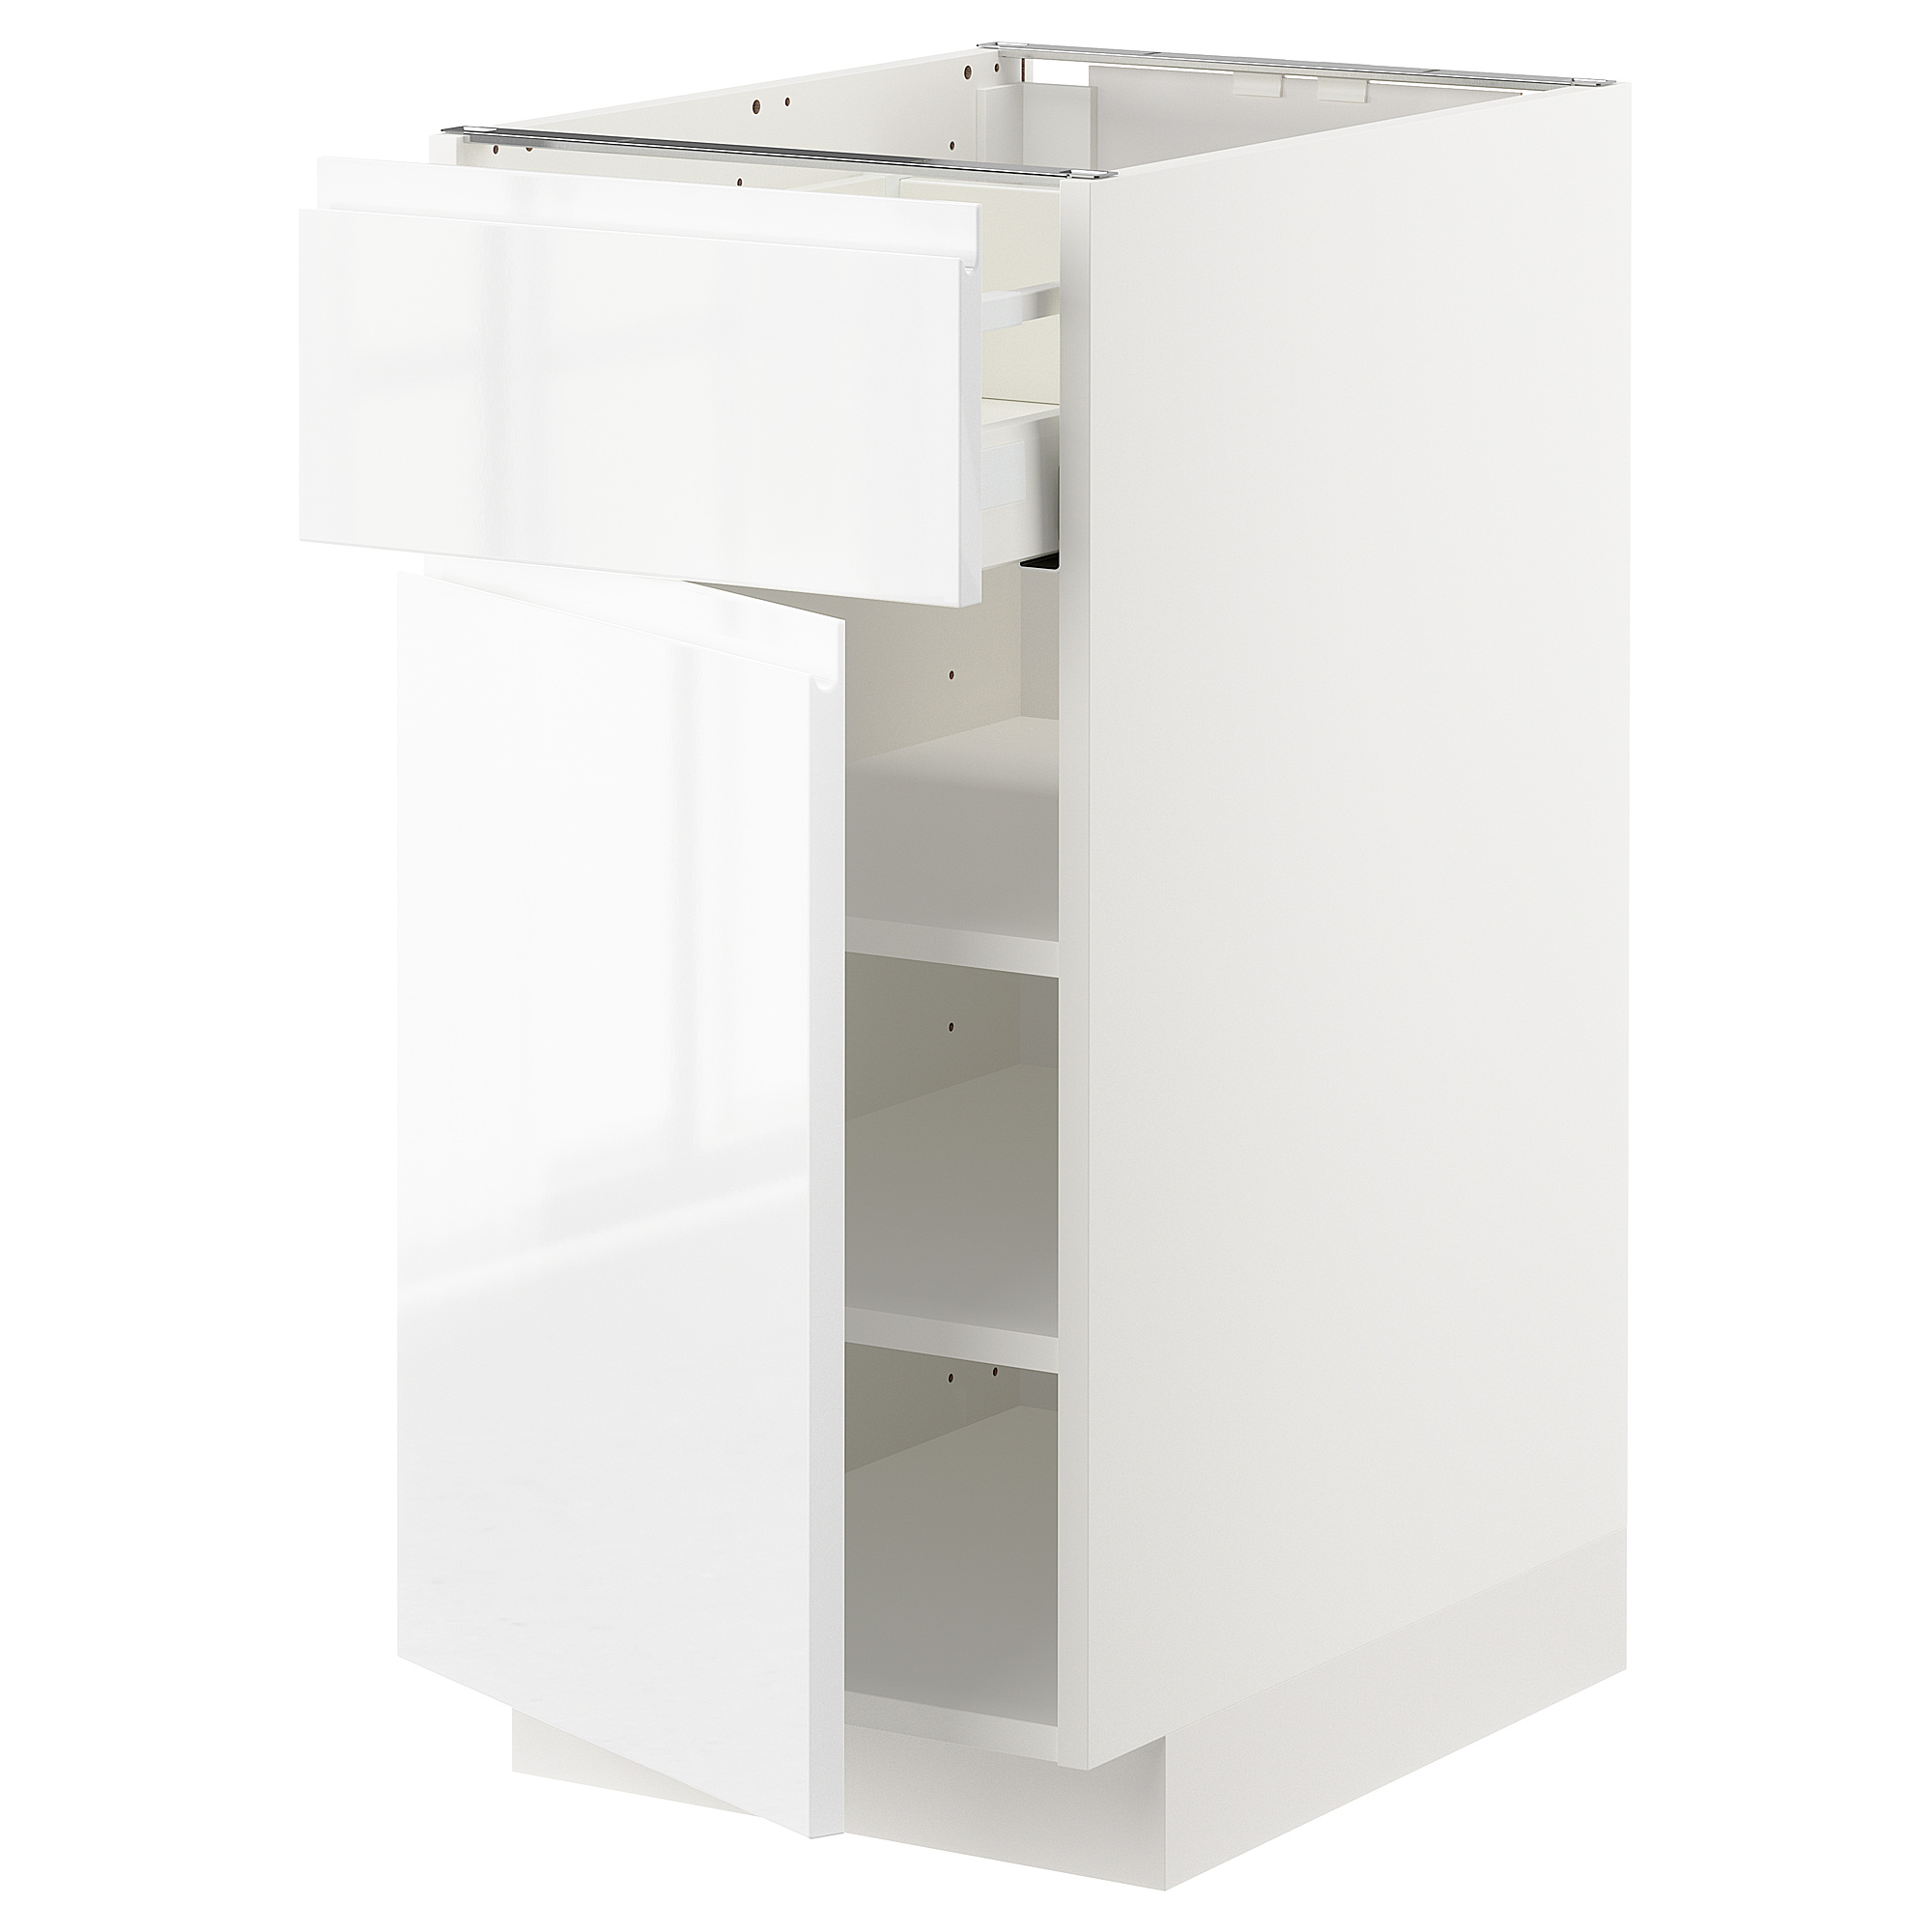 METOD/MAXIMERA base cabinet with drawer/door